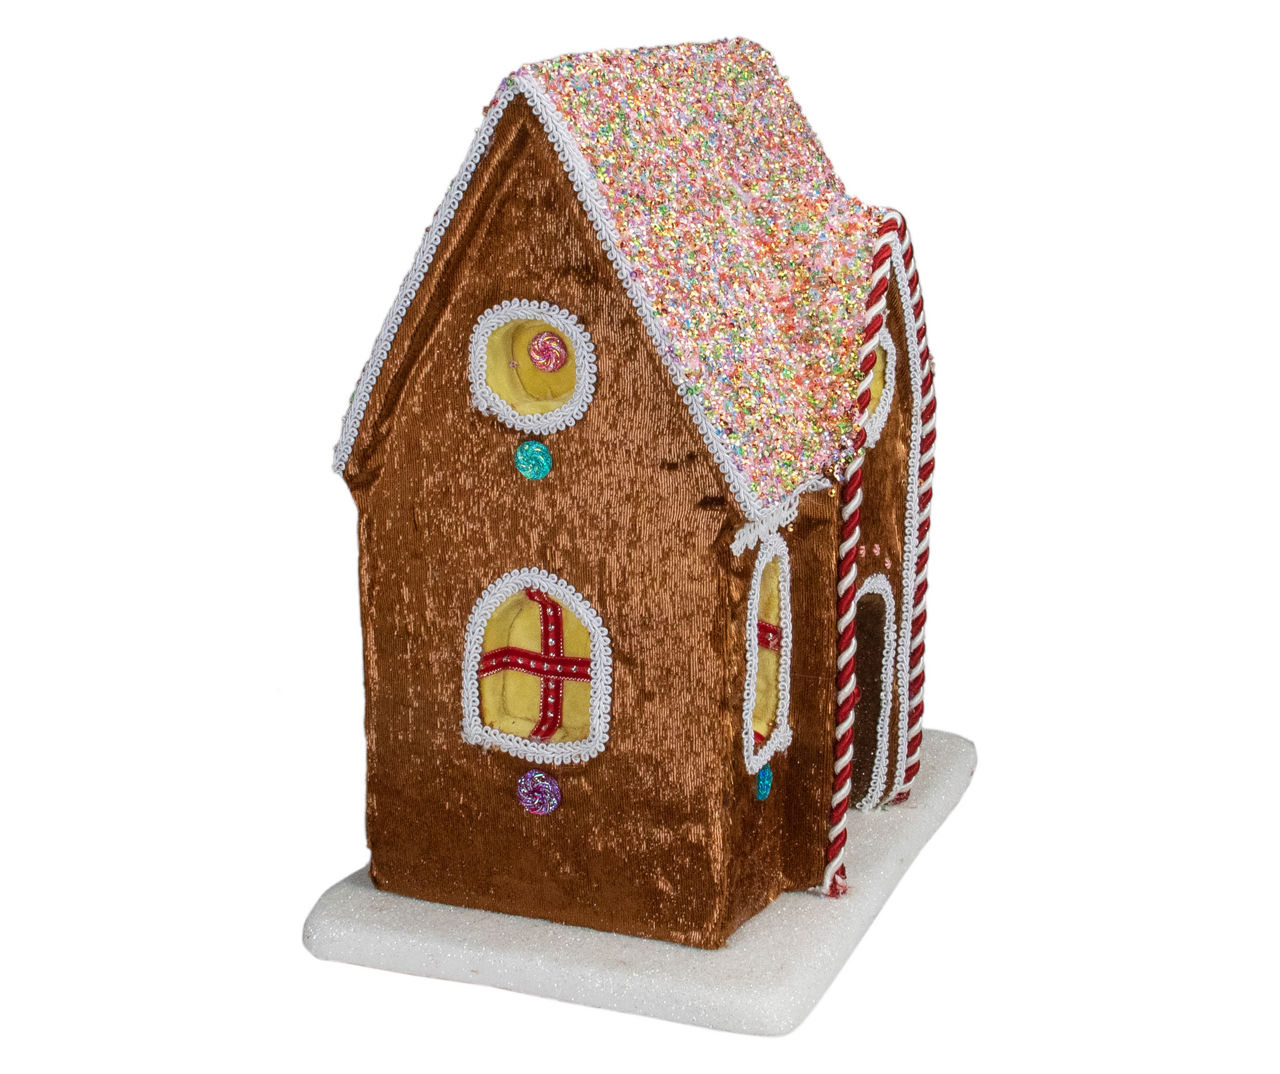 Northlight Gingerbread House Tabletop Decor | Big Lots